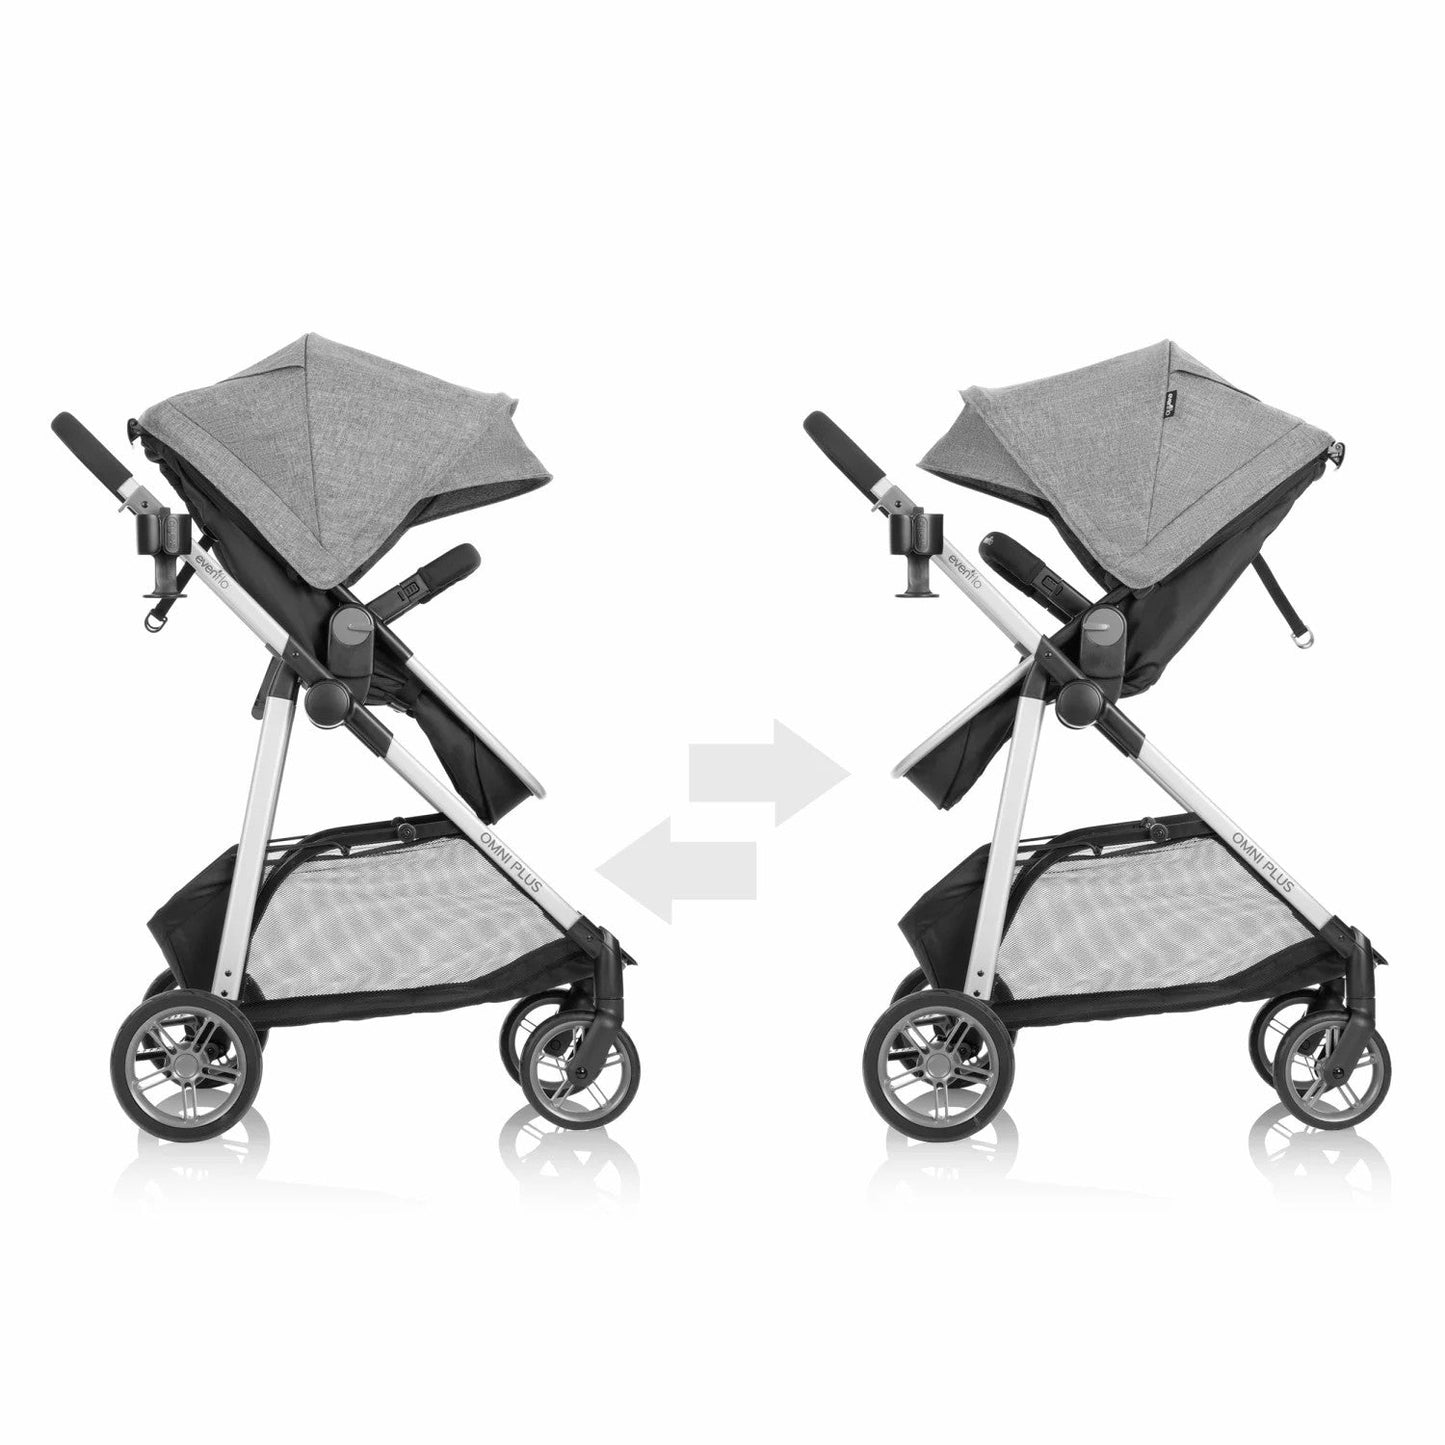 Baby Toddler Stroller Travel System Combo with High chair